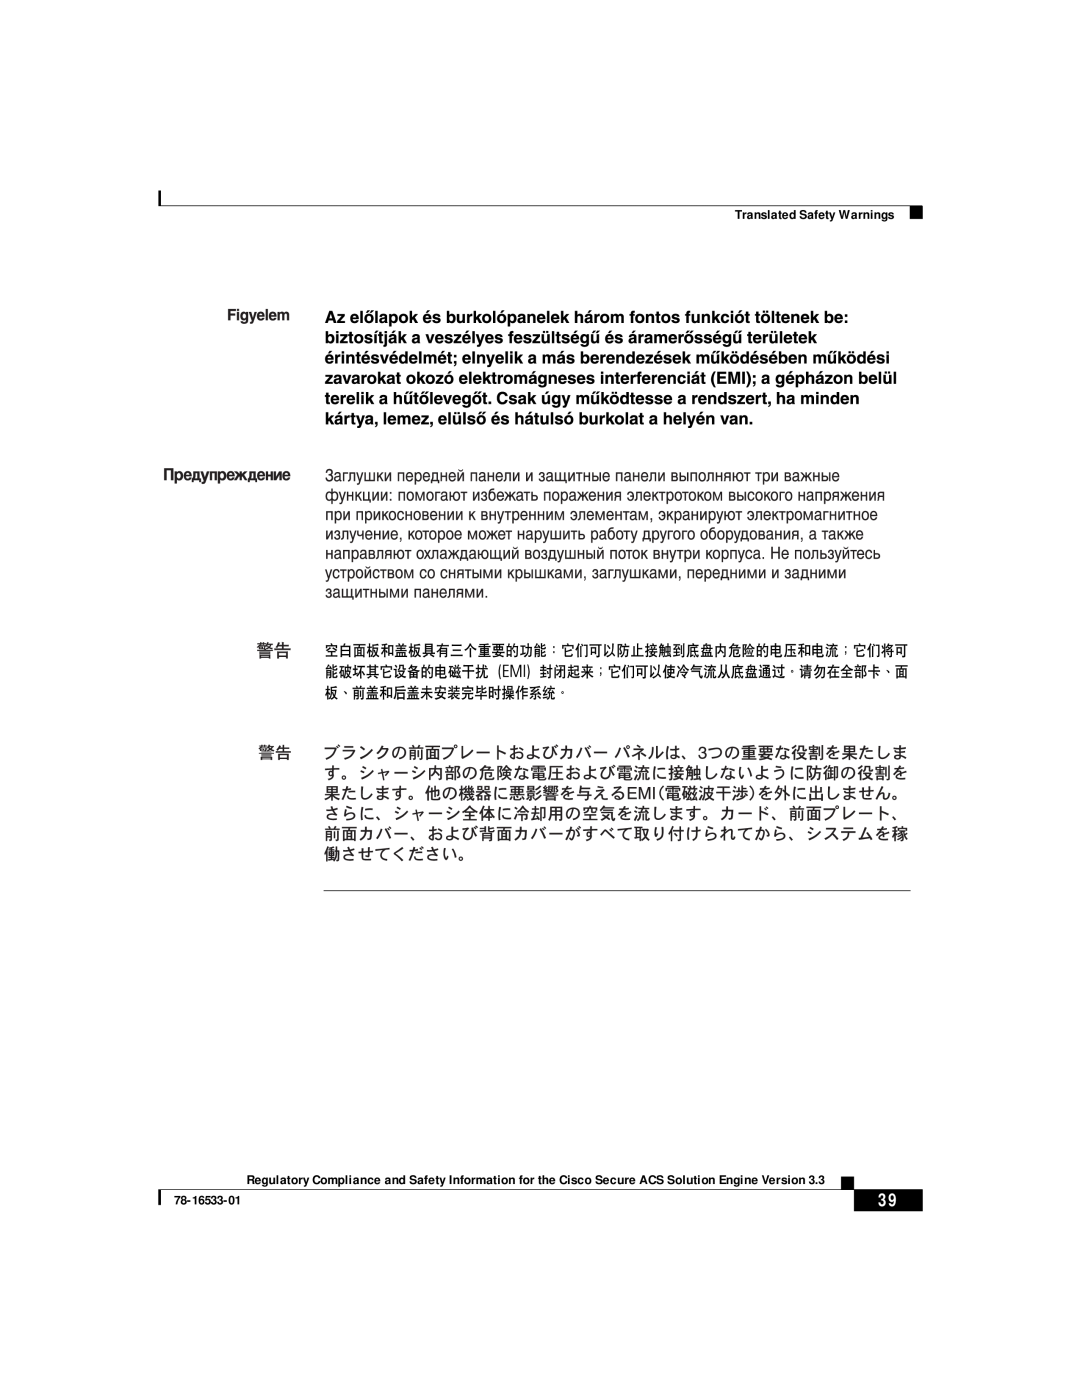 Cisco Systems CSACSE-1112-K9 manual Translated Safety Warnings, 78-16533-01 